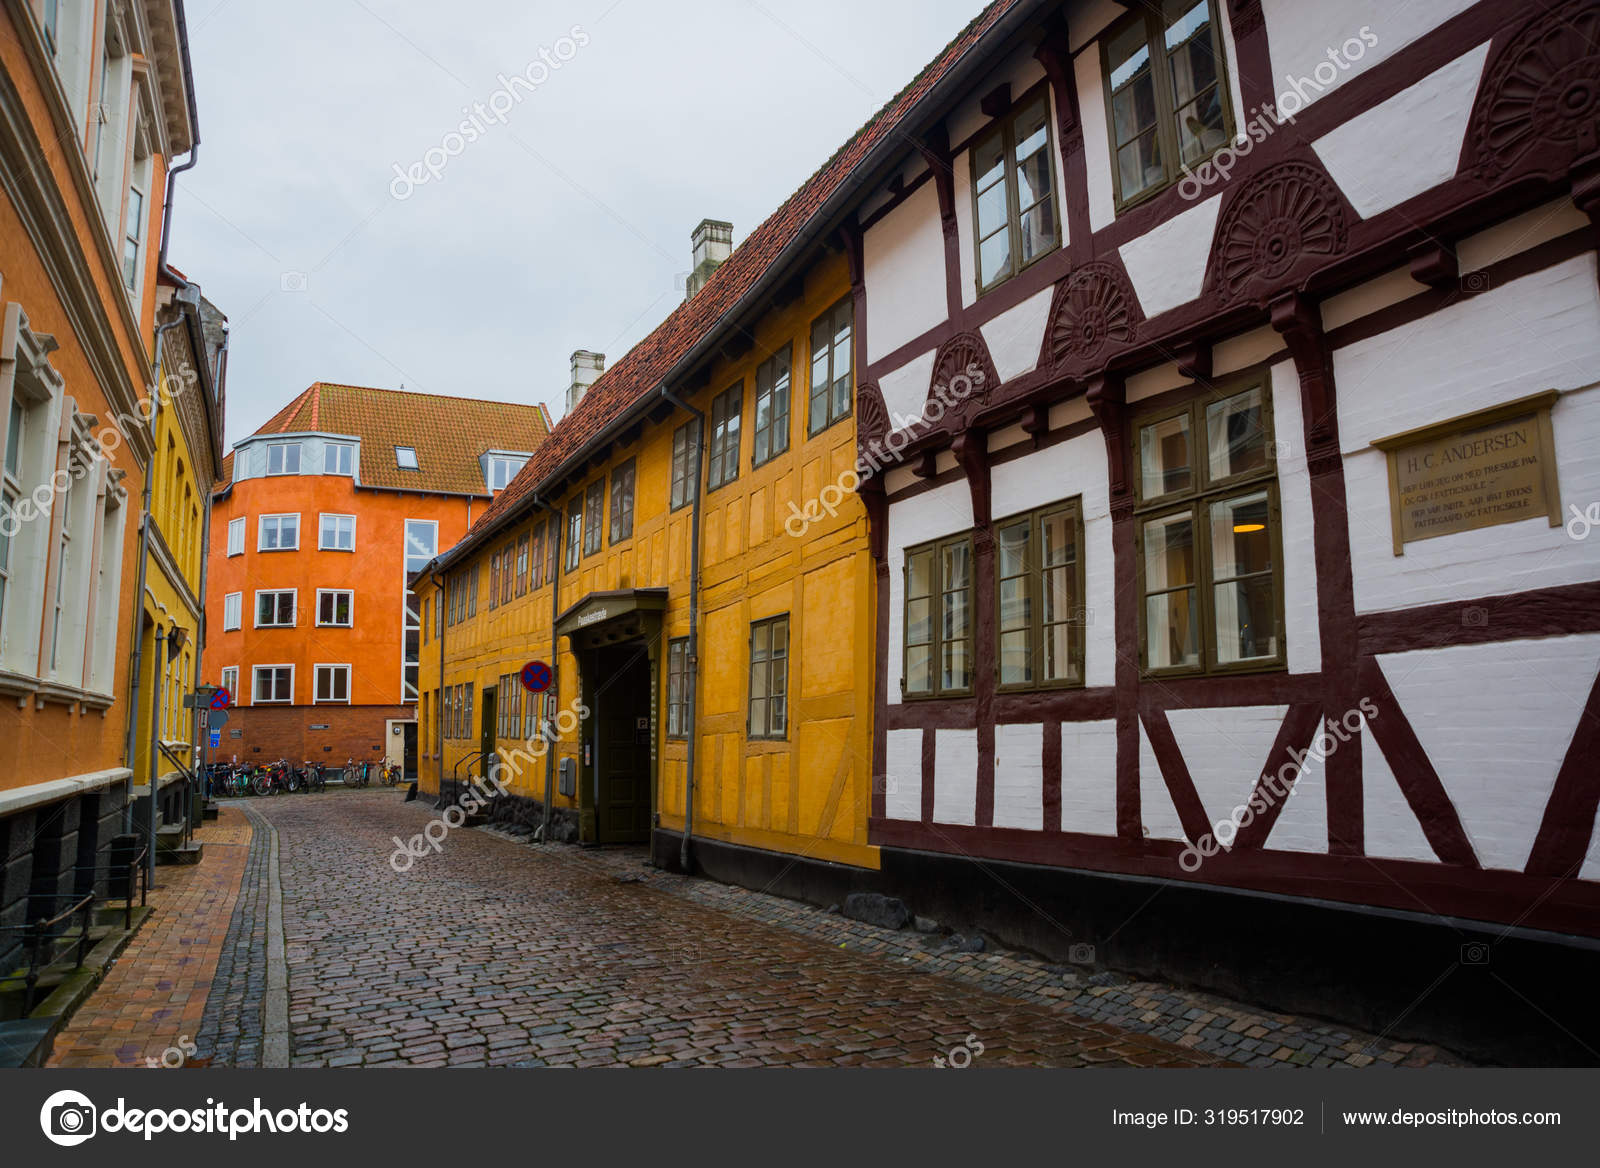 Odense Denmark Old Homes In Cobbled Streets In Odense The City Of Hans Christian Andersen Stock Photo Image By C A1804